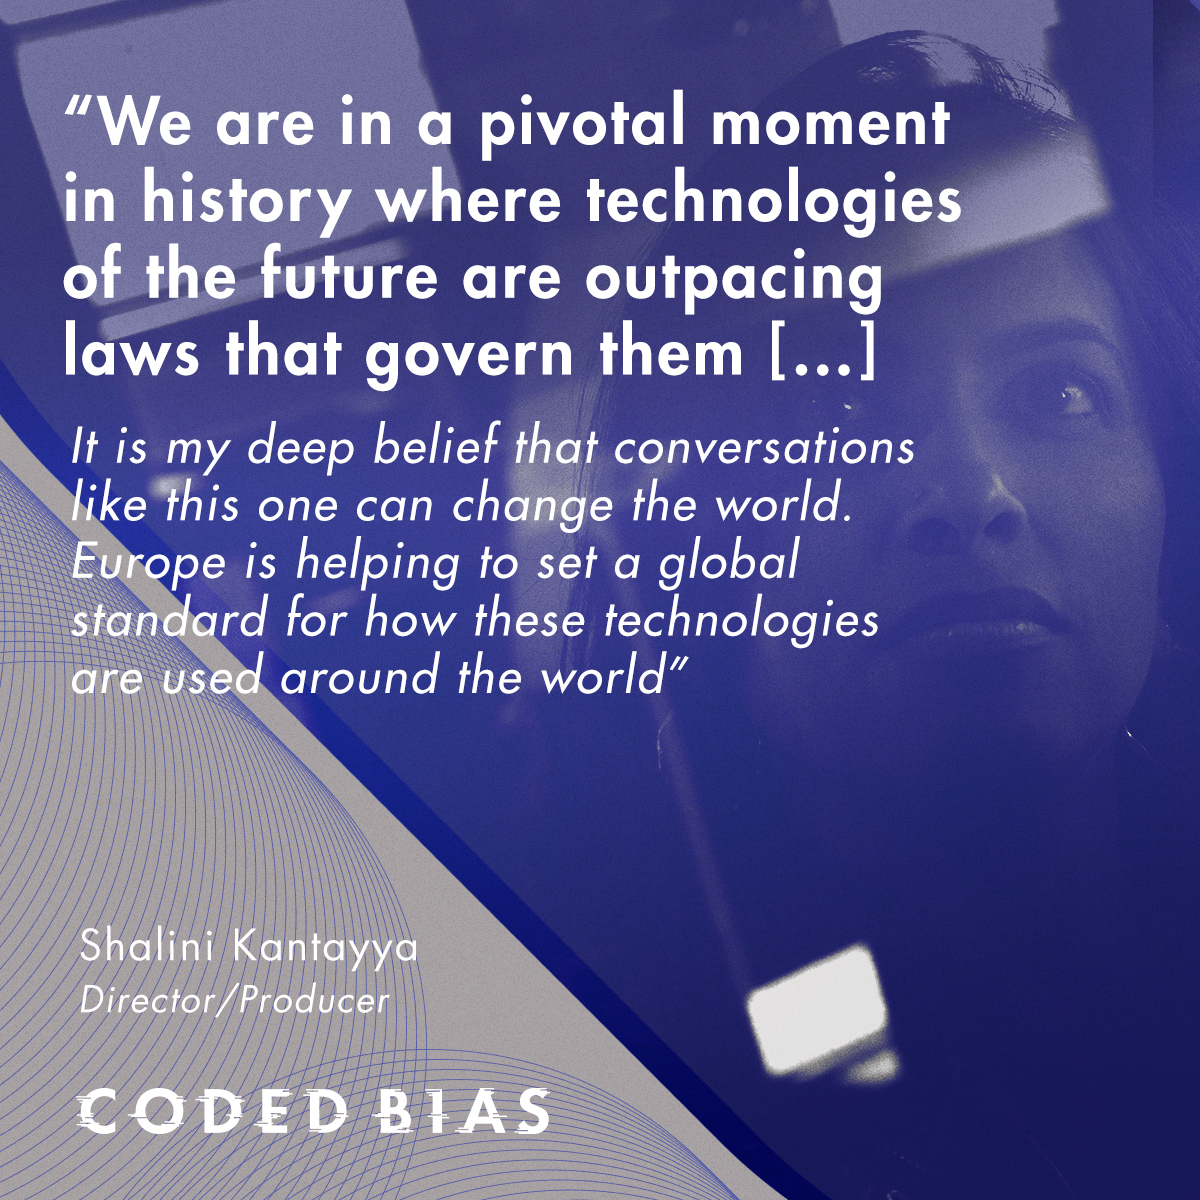 “We are in a pivotal moment in history where technologies of the future are outpacing laws that govern them' - Shalini Kantayya #codedbias #humanityfirst #socialjustice #surveillance #facerecognition #facialrecognition #bigtech